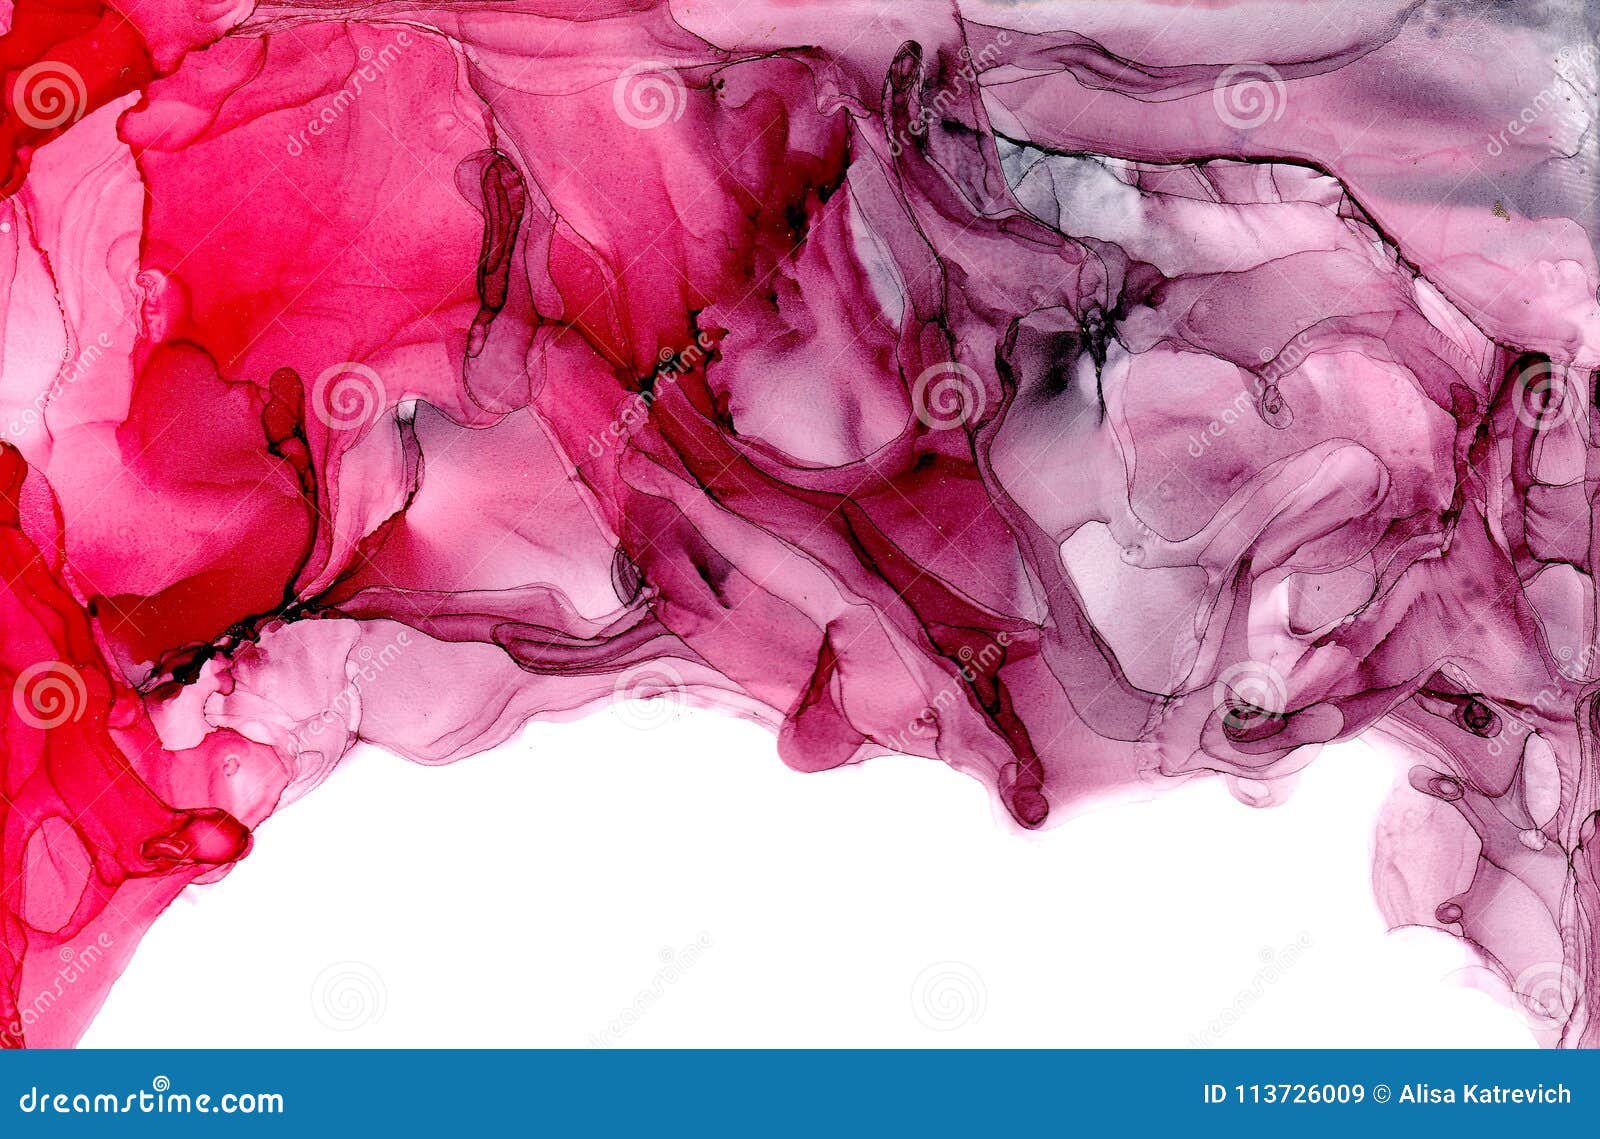 alcohol ink texture. fluid ink abstract background. art for 